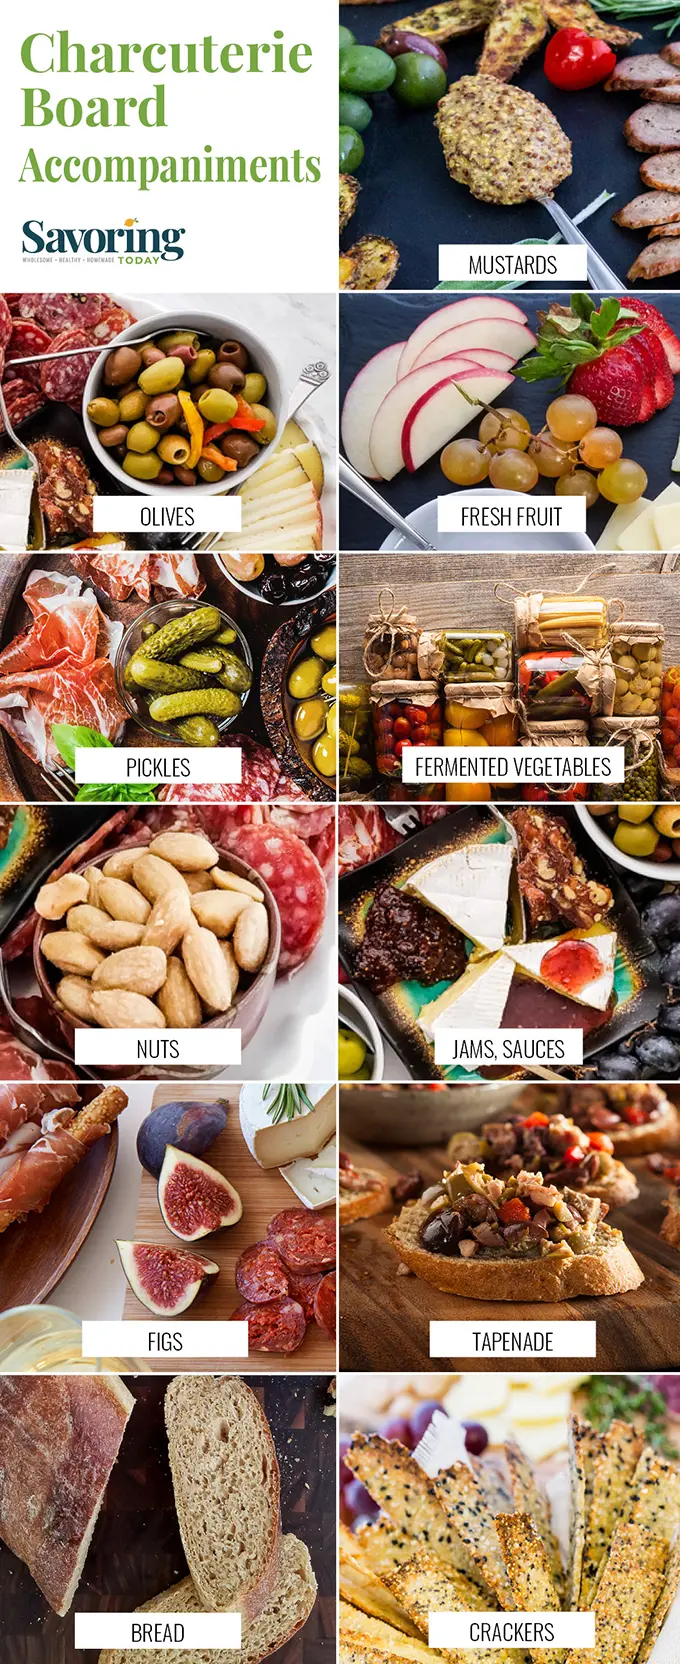 photo collage of charcuterie accompaniments like crackers, olives, fruit, figs, pickles, and mustards